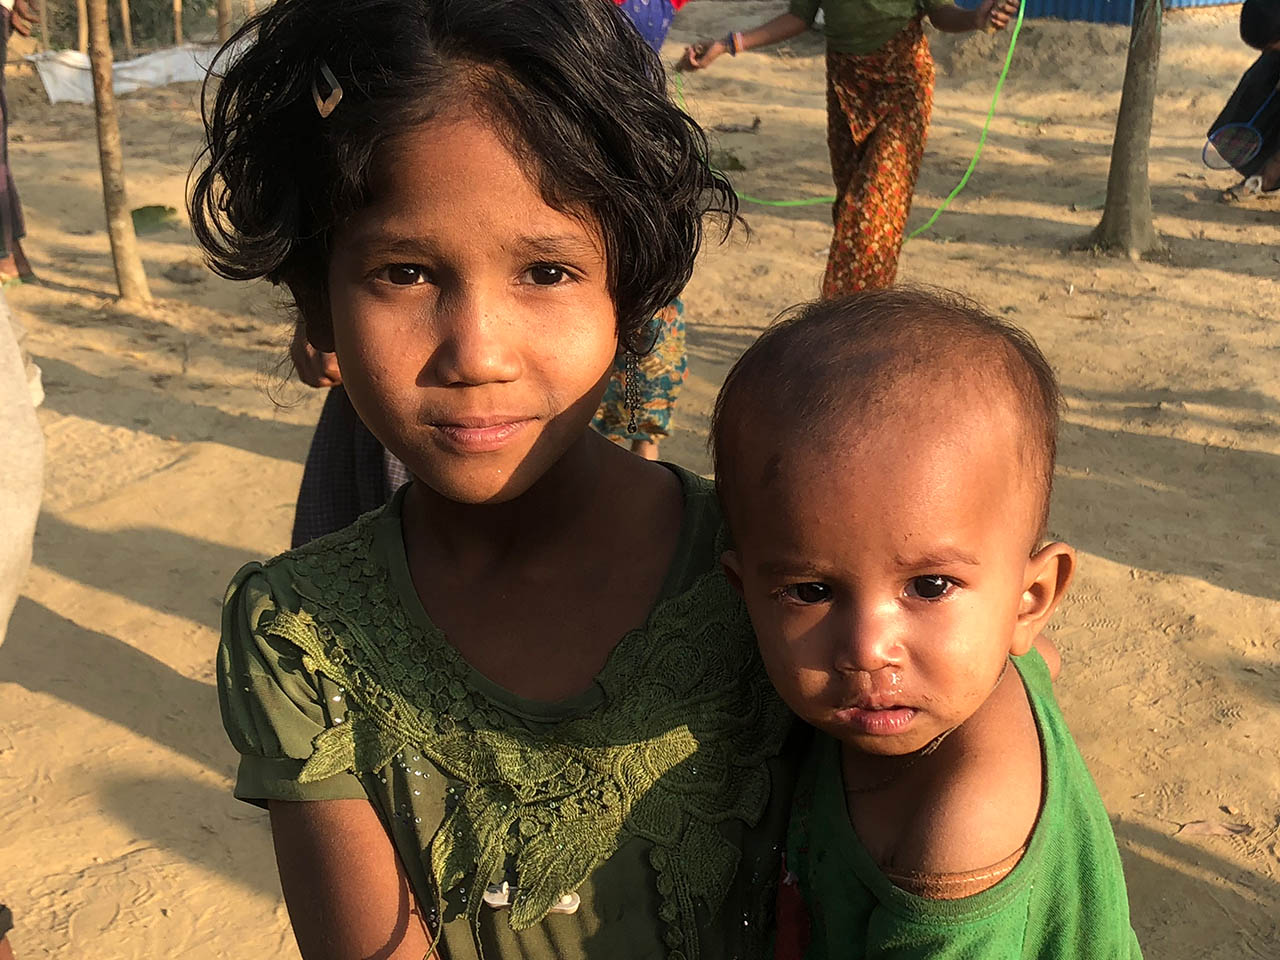 Two Rohingya children in a refugee camp 